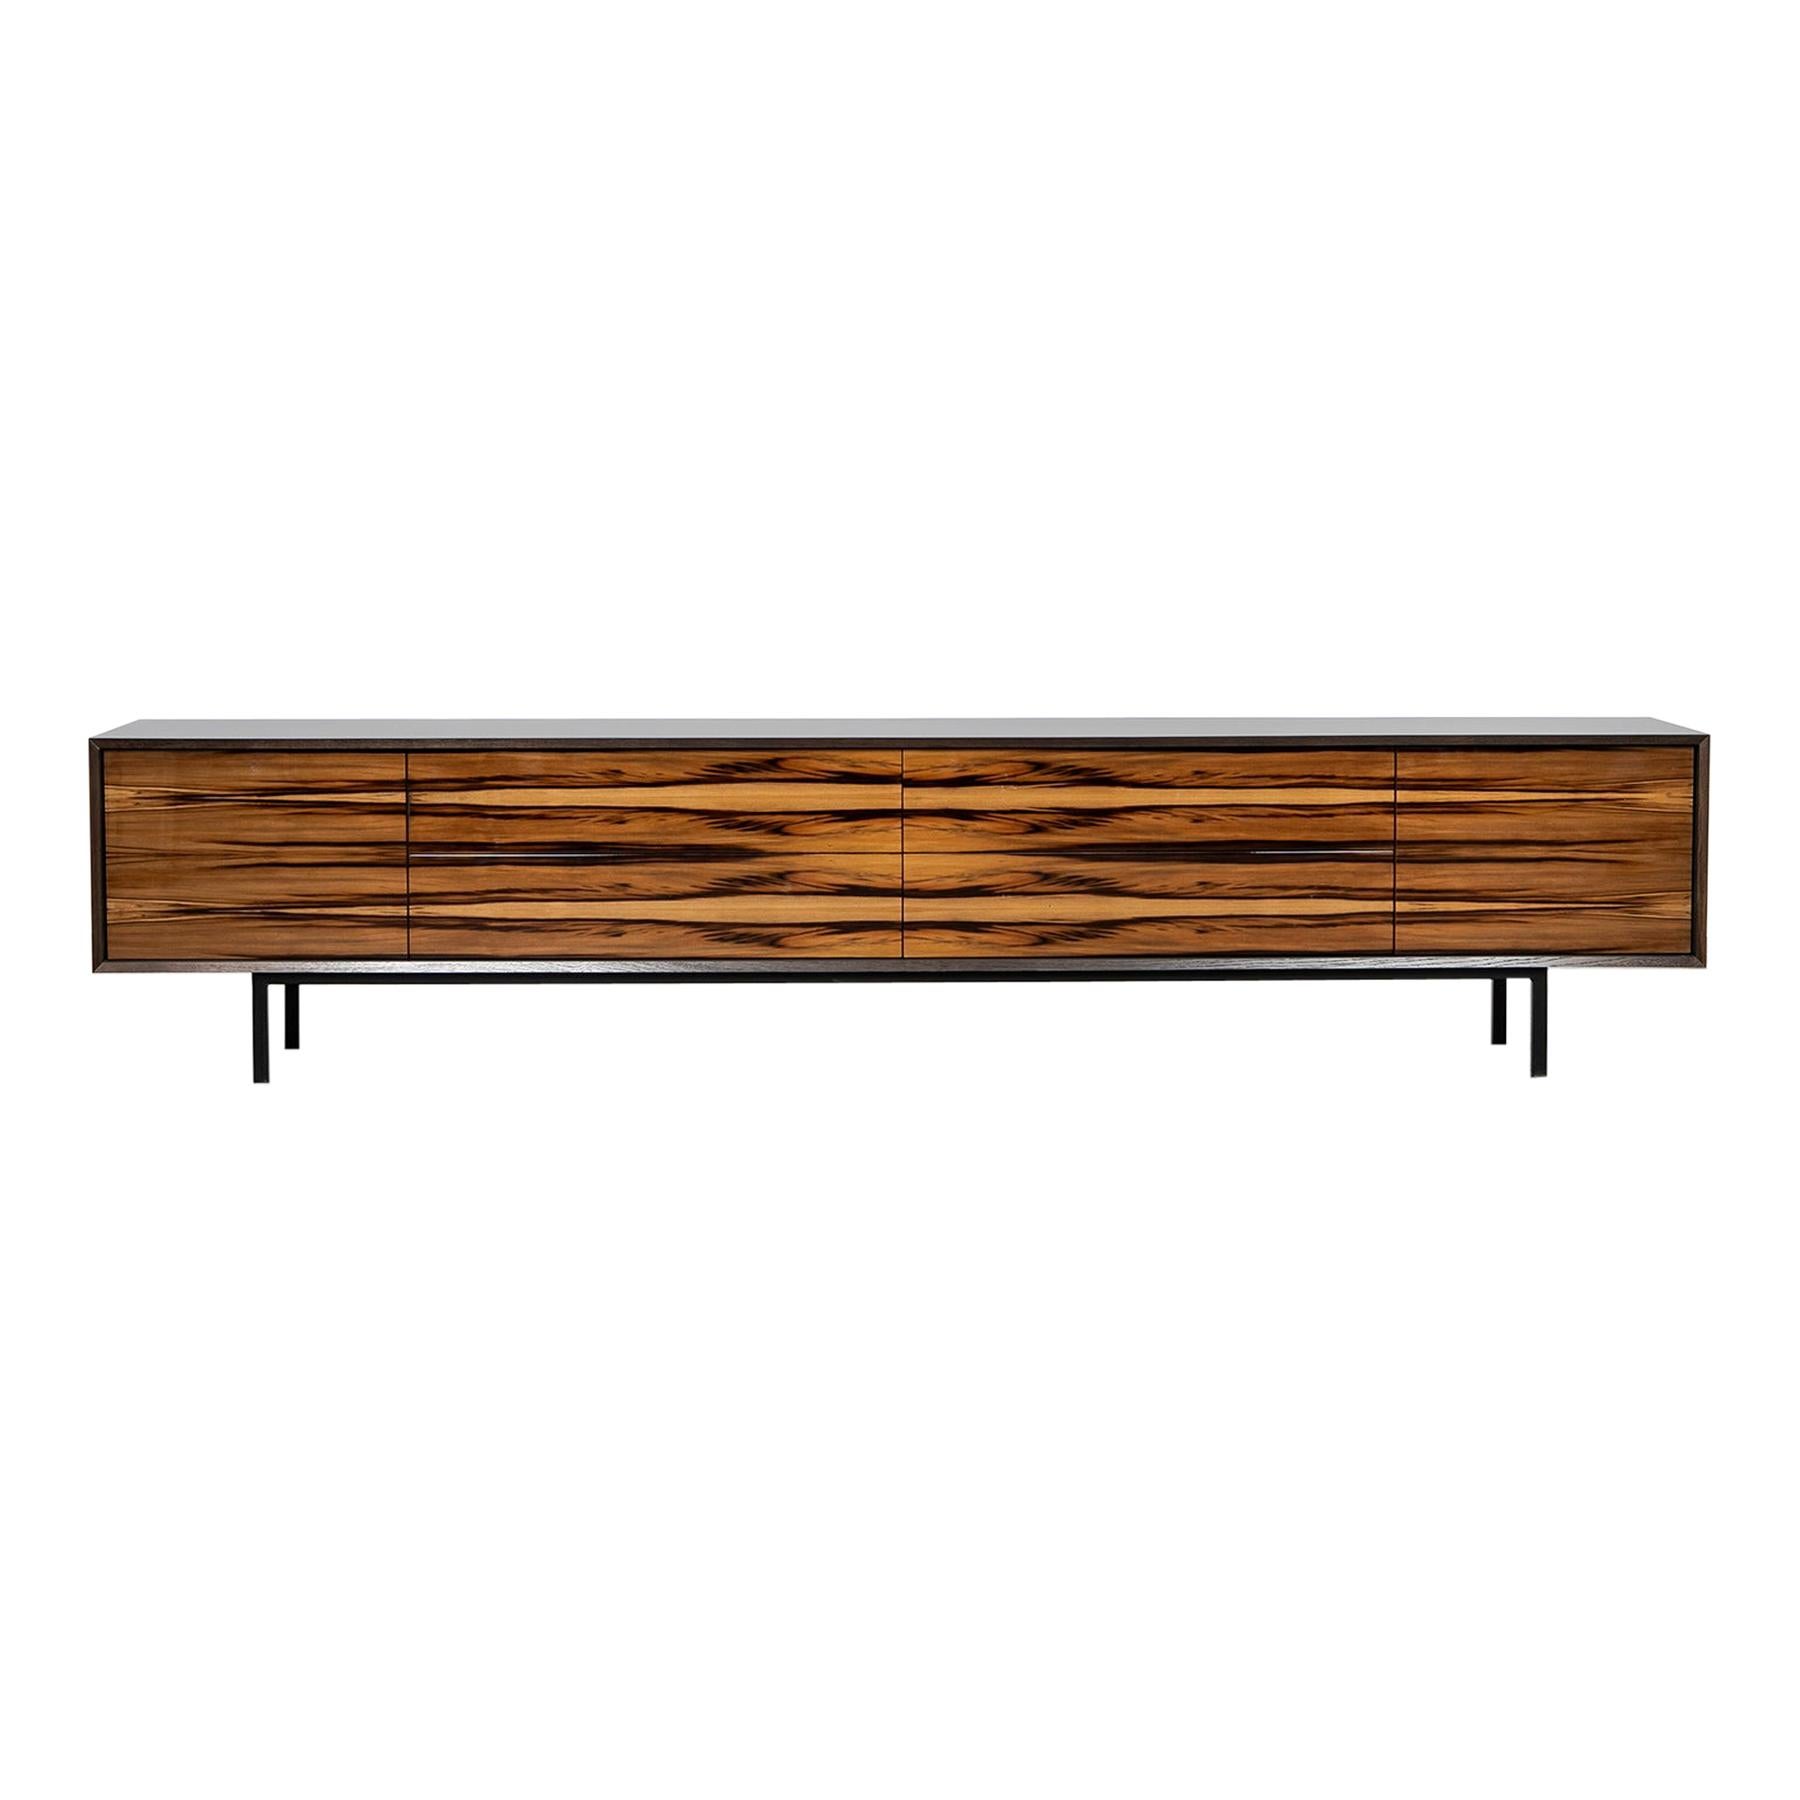 Contemporary Satin Nut Sideboard by Johannes Hock